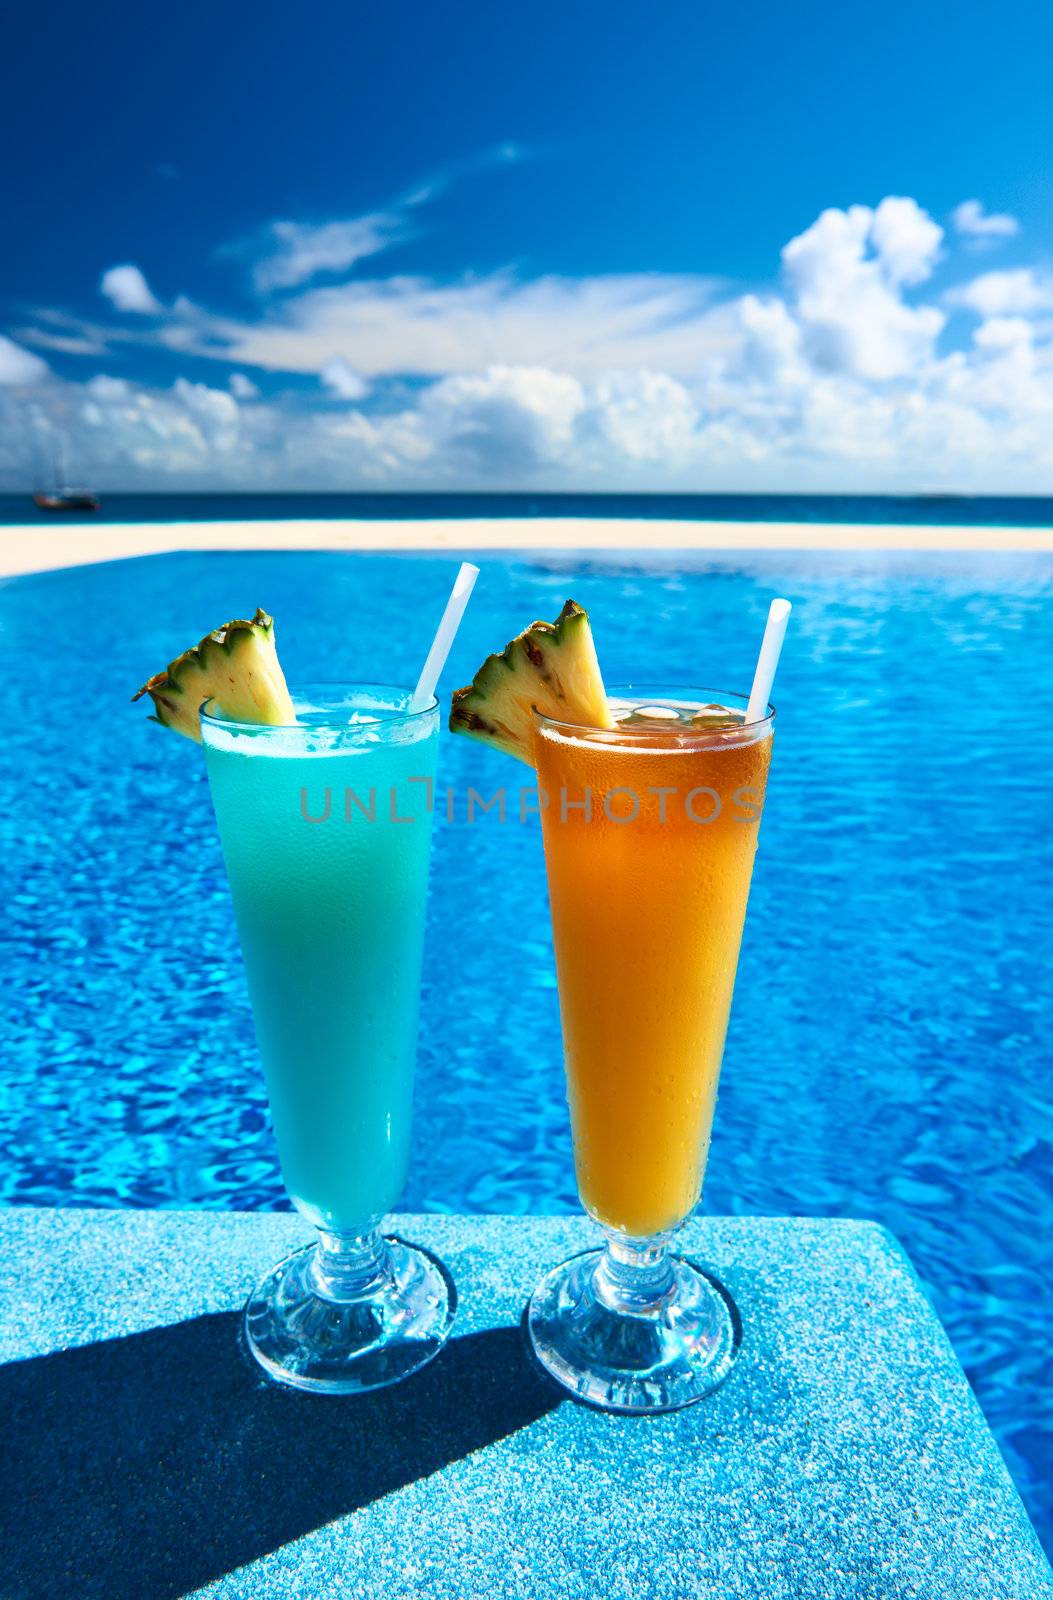 Cocktails near swimming pool by haveseen